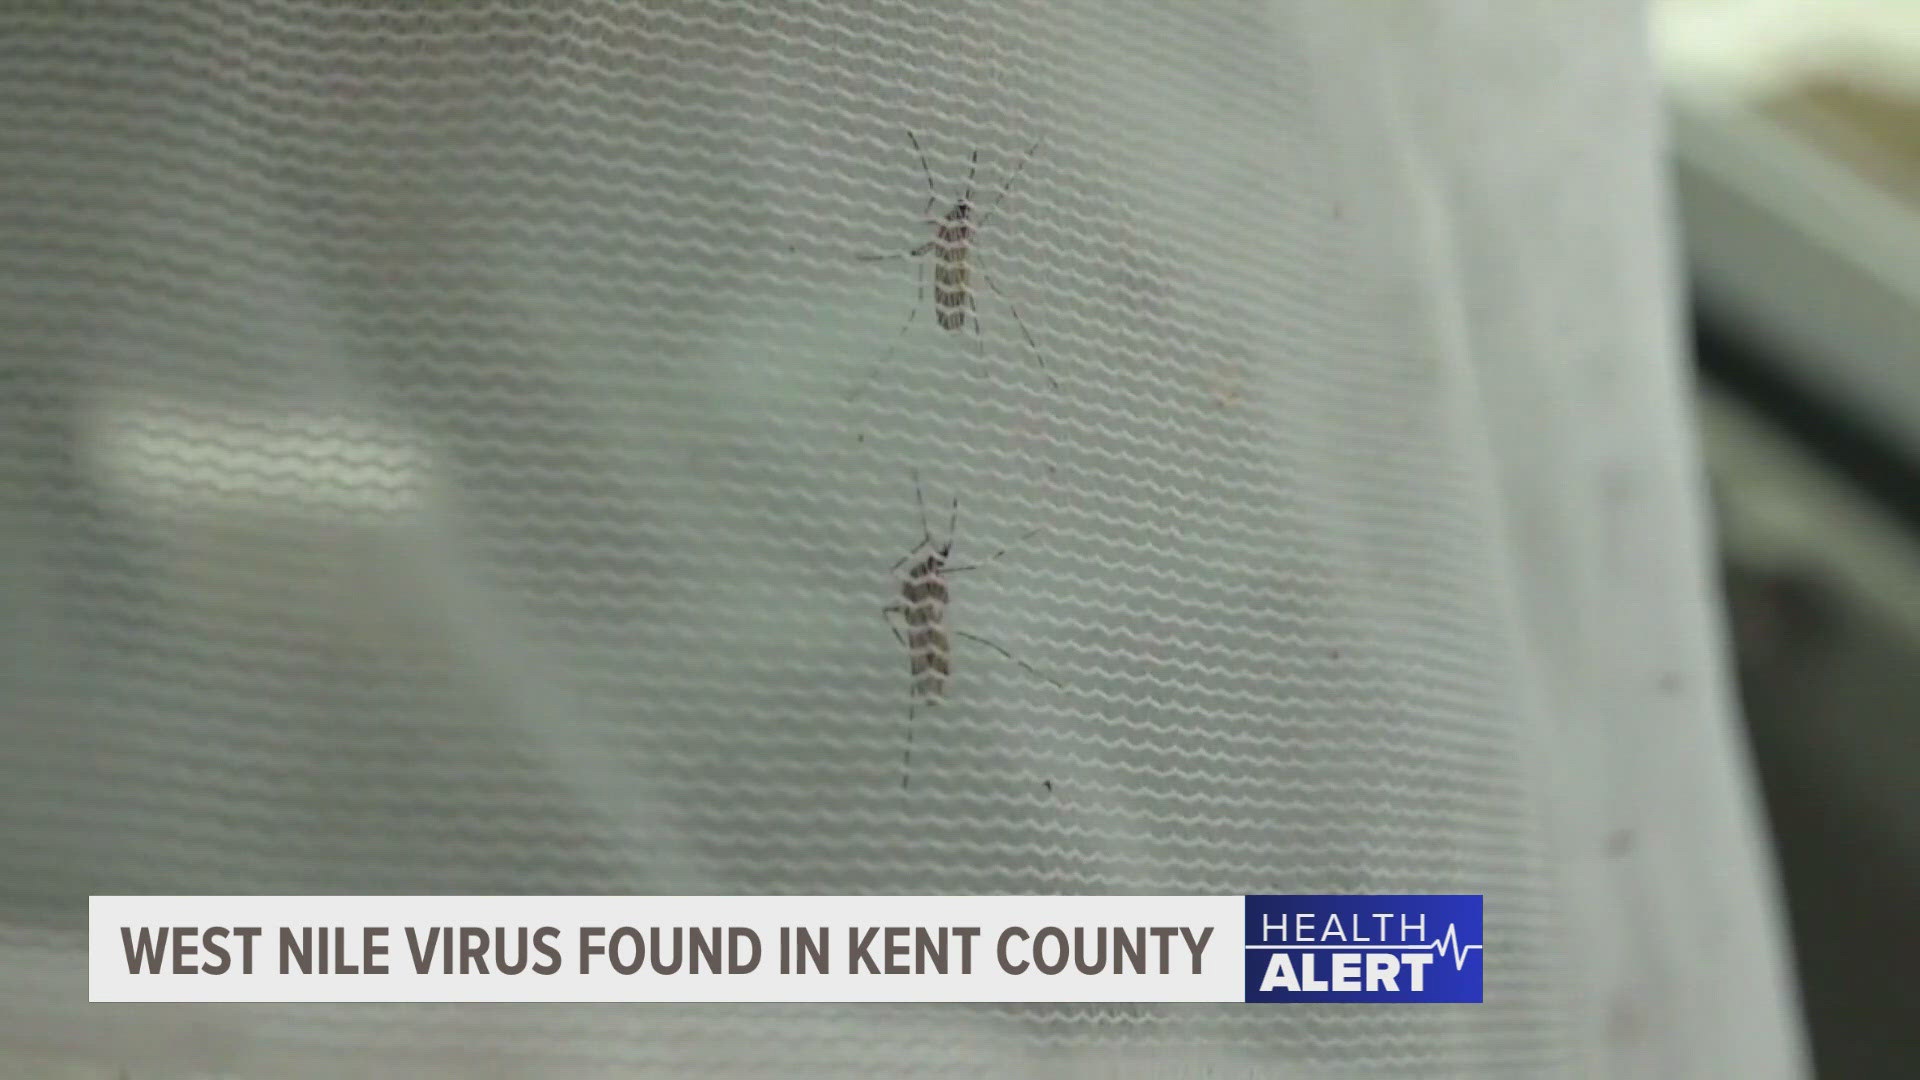 The Kent County Health Department has detected West Nile virus in a sample of area mosquitoes.